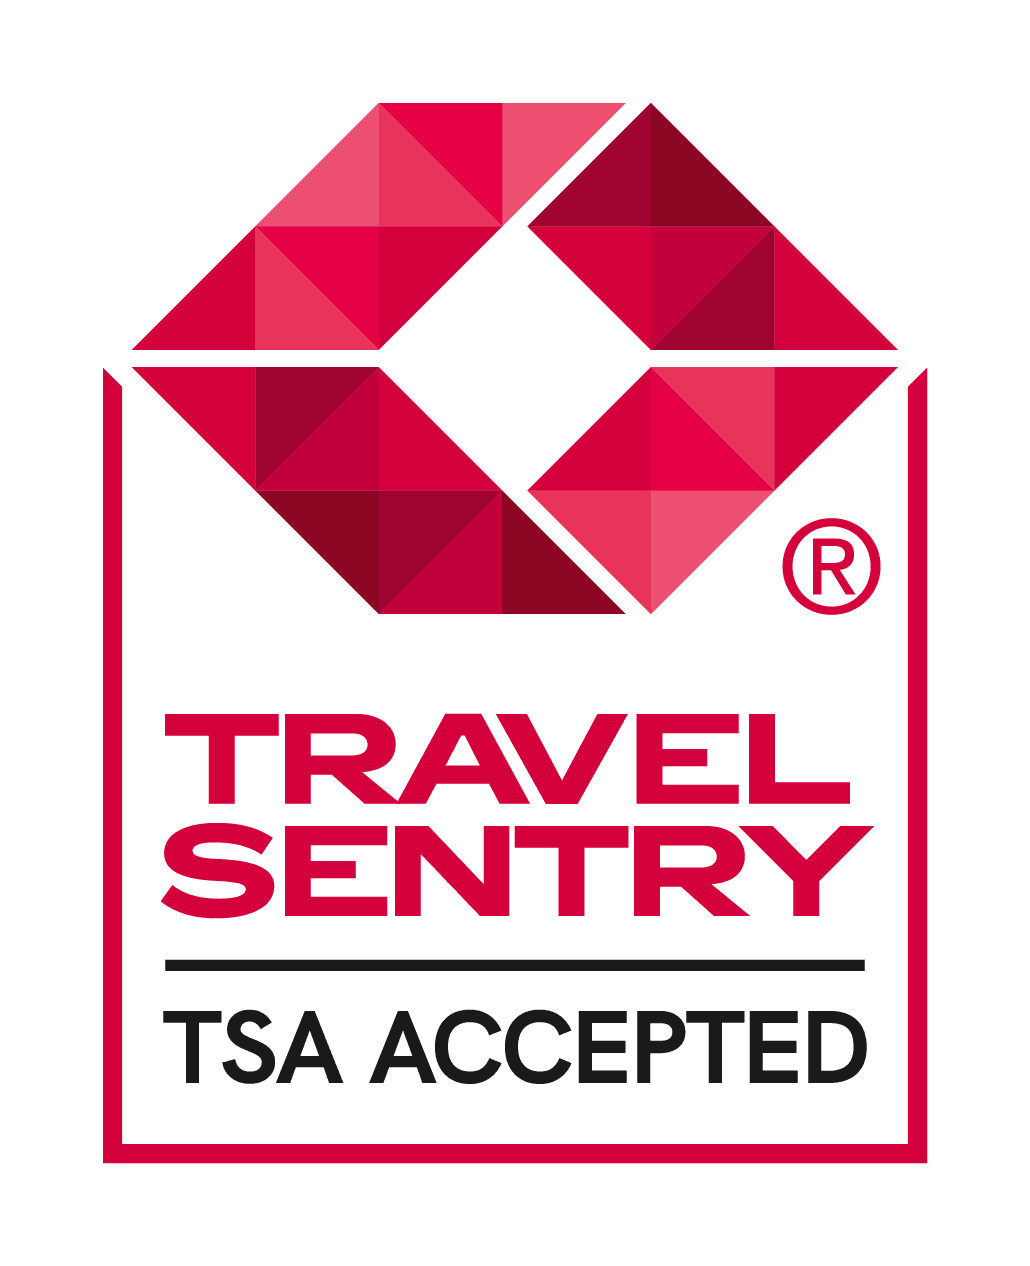 travel sentry approved meaning